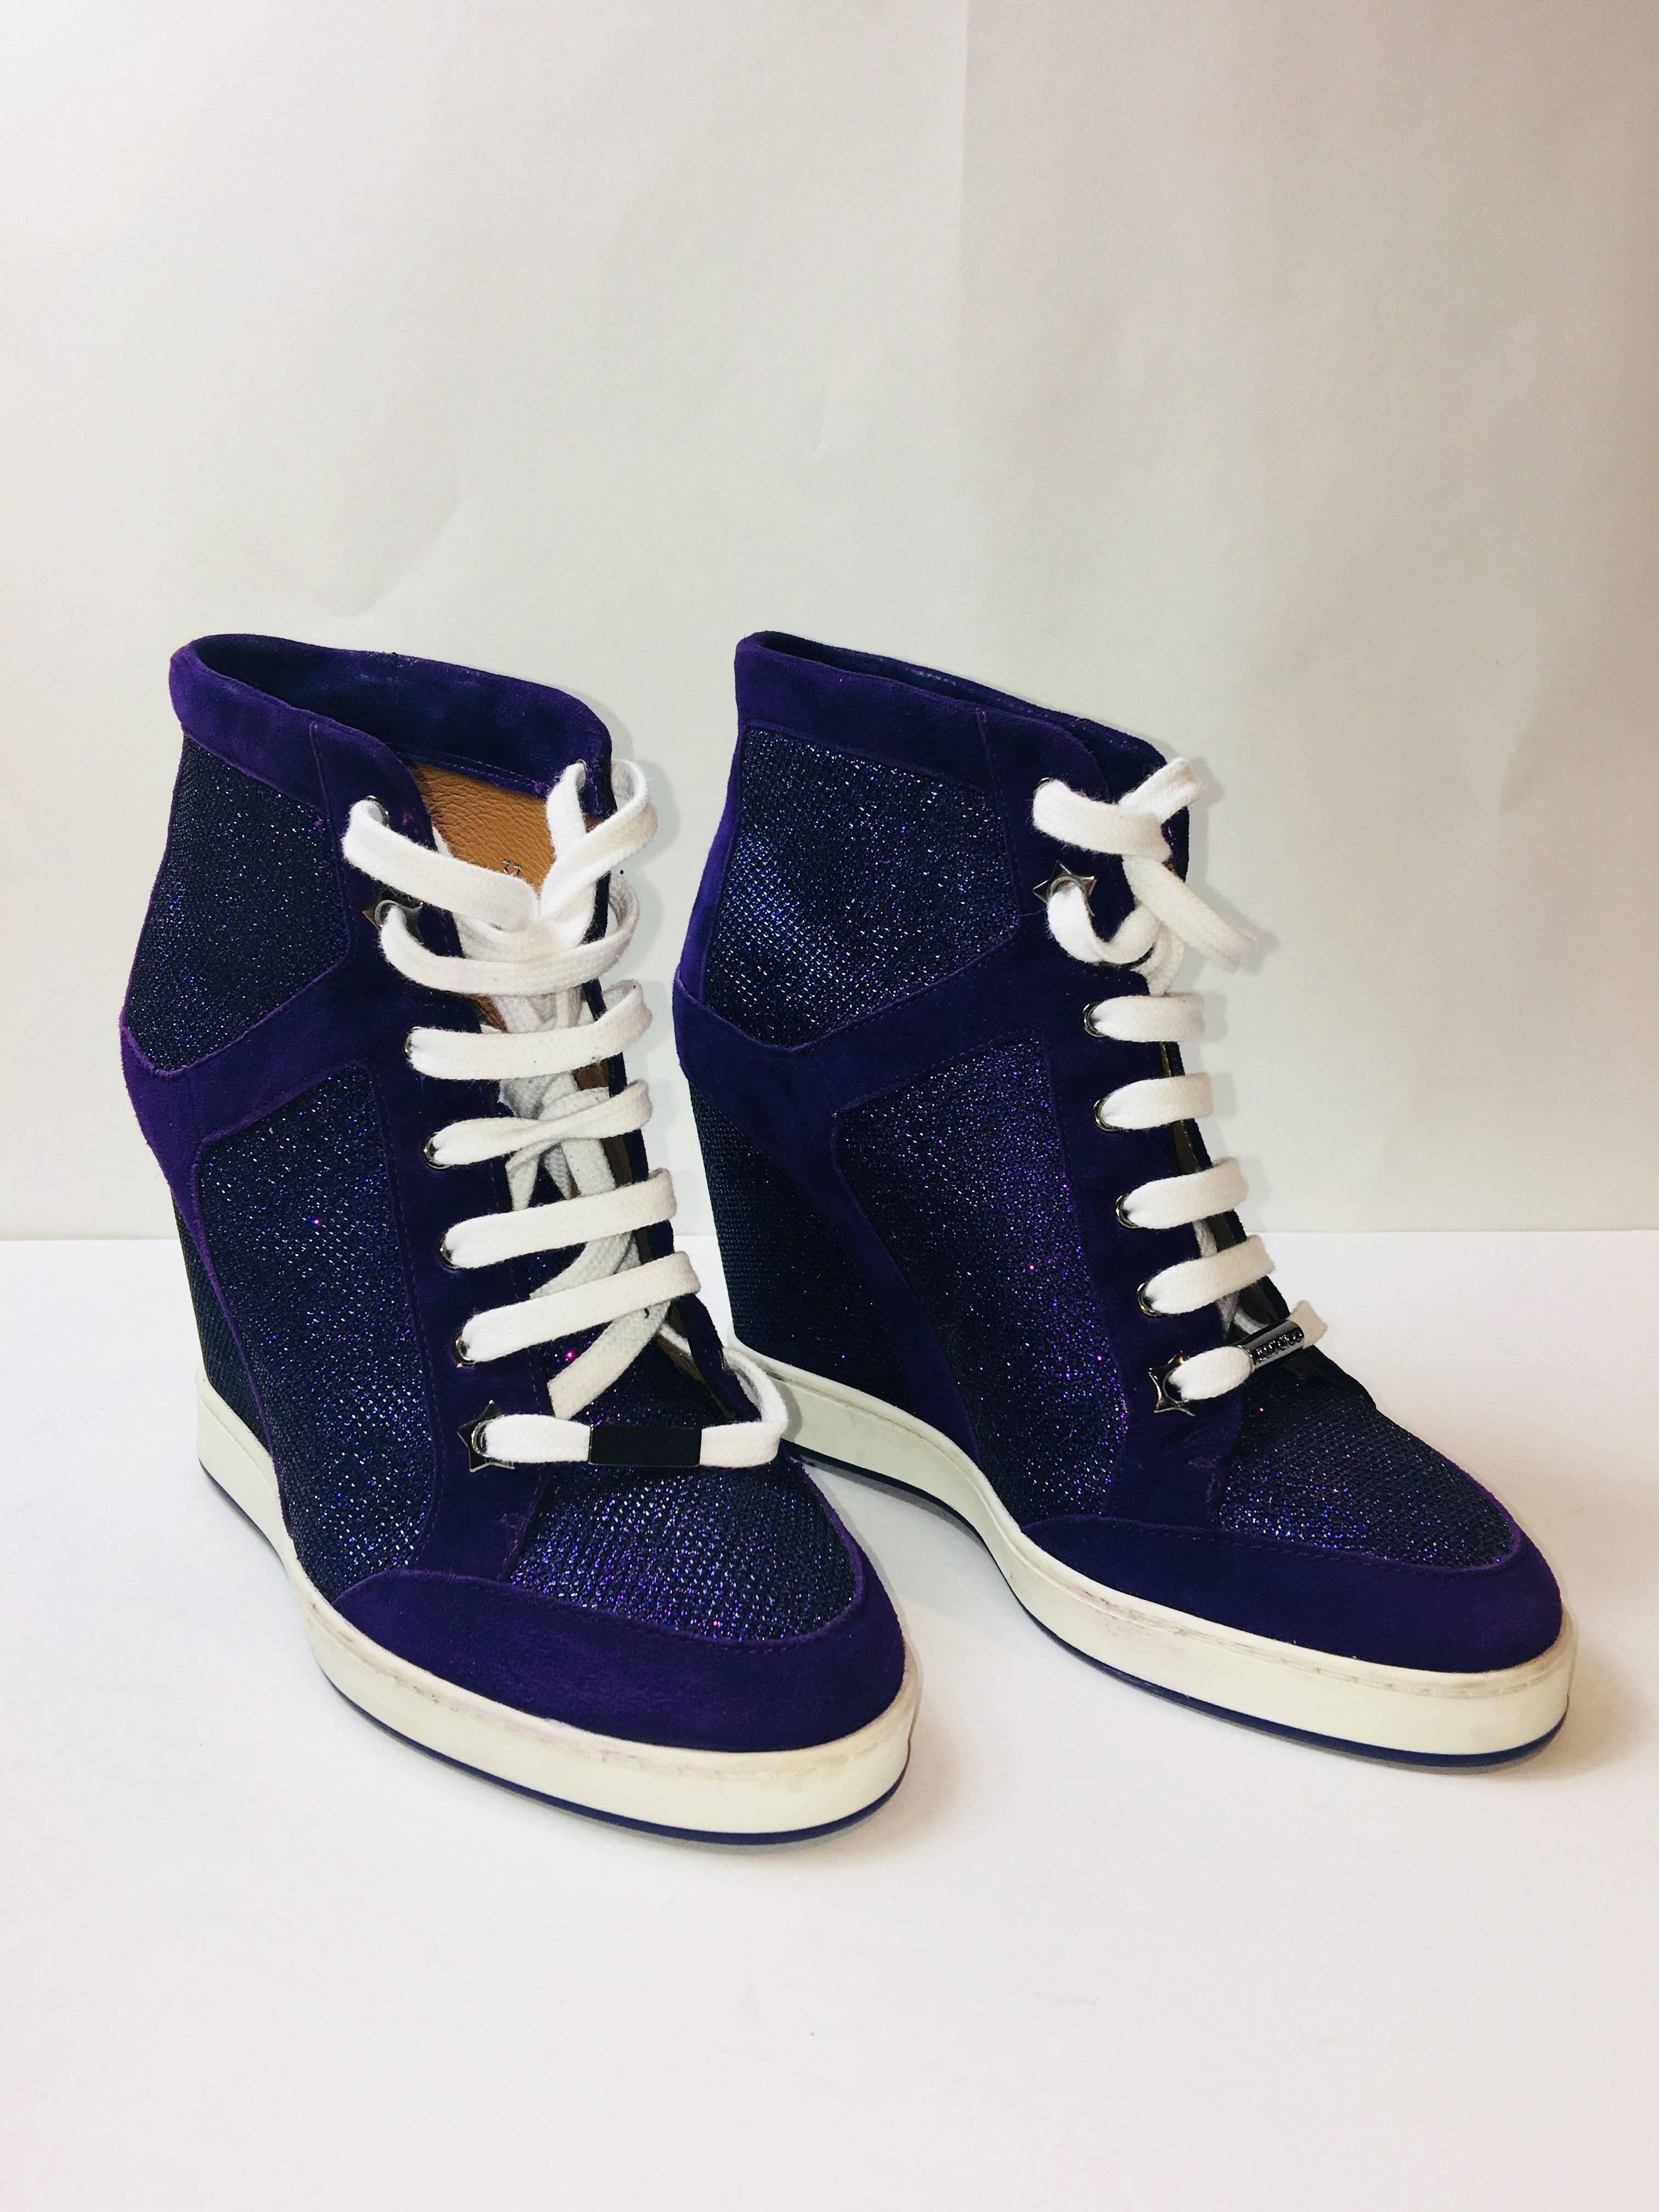 Jimmy Choo Purple High Top Wedge with Sparkle Panels and White Laces.